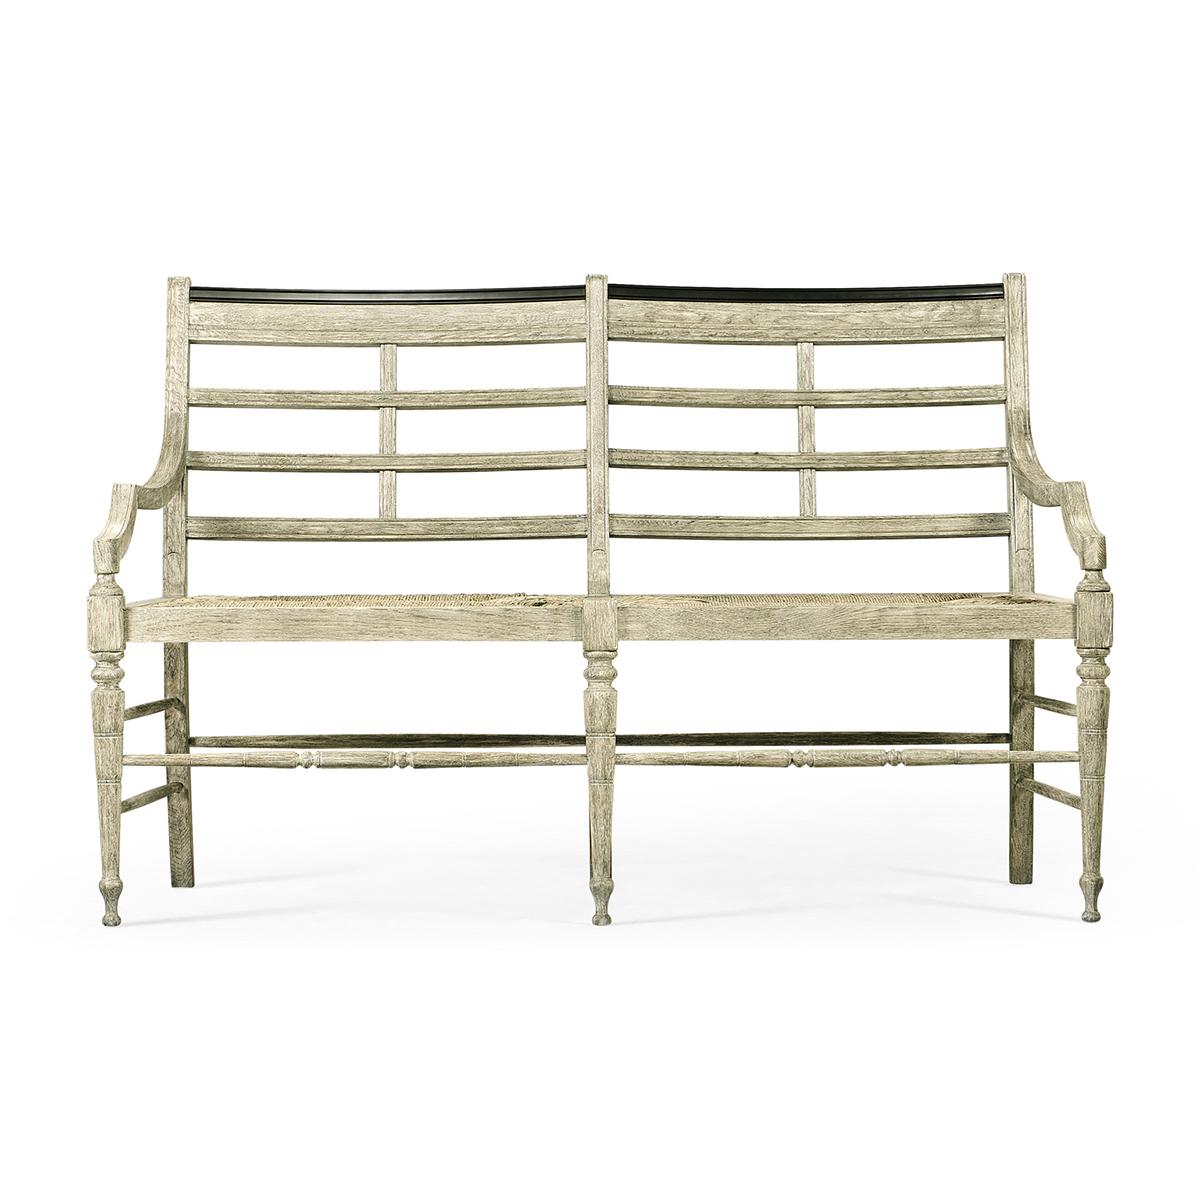 Country Painted Settee, a gray painted oak finish in a rustic country style, with molded slat backs, on rush seats, with turned and tapered legs and a stretcher base.

Dimensions: 59